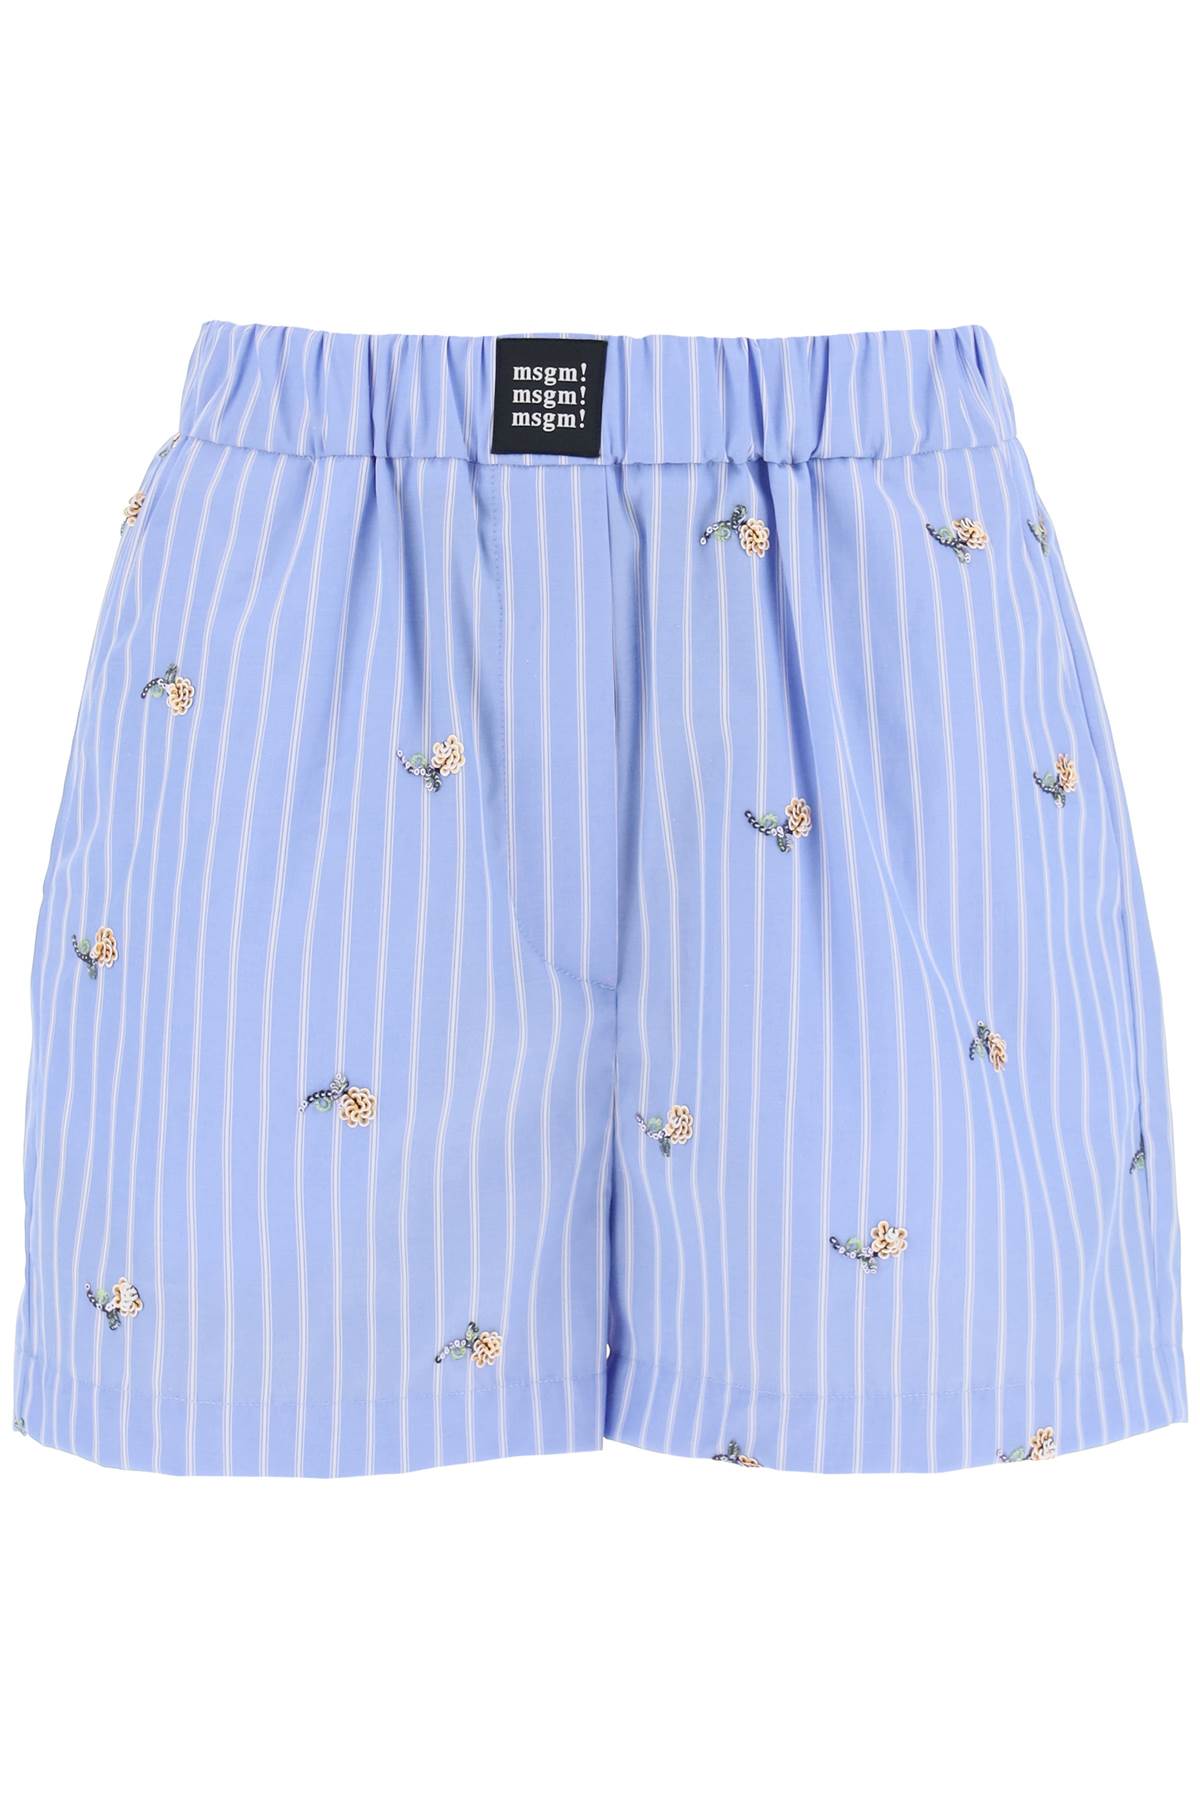 Shop Msgm Striped Poplin Shorts With Sequin Flowers In White, Light Blue